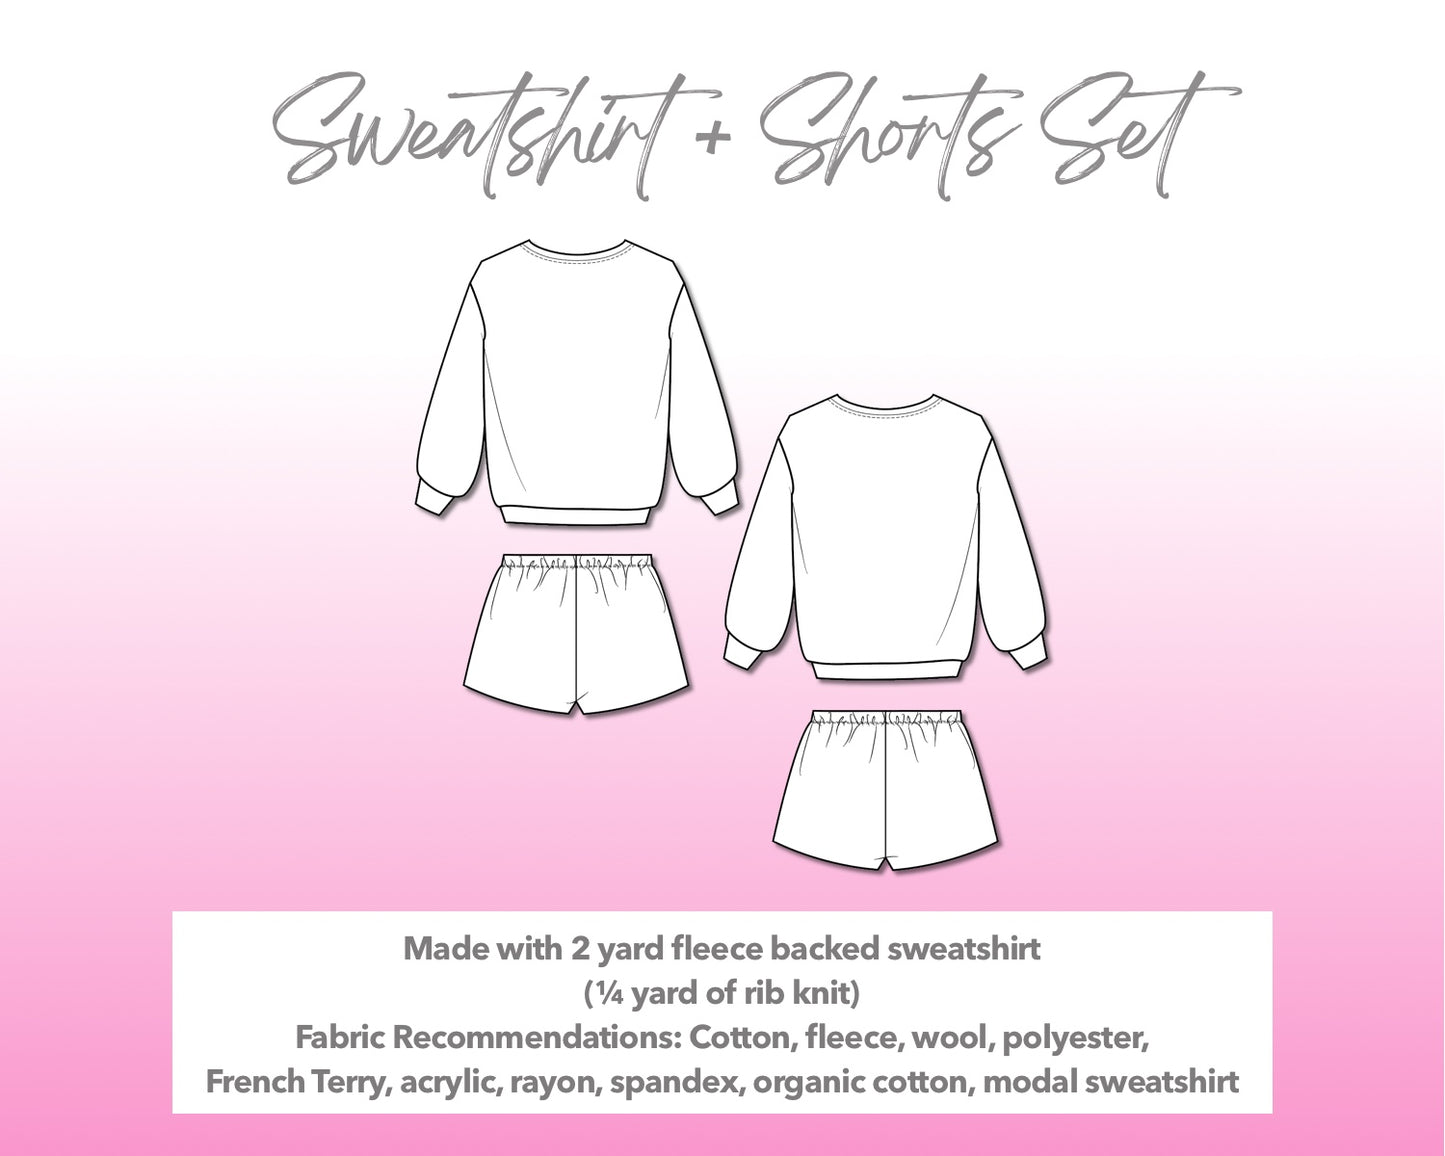 Illustration and detailed description for Sweatshirt and Shorts Set sewing pattern.